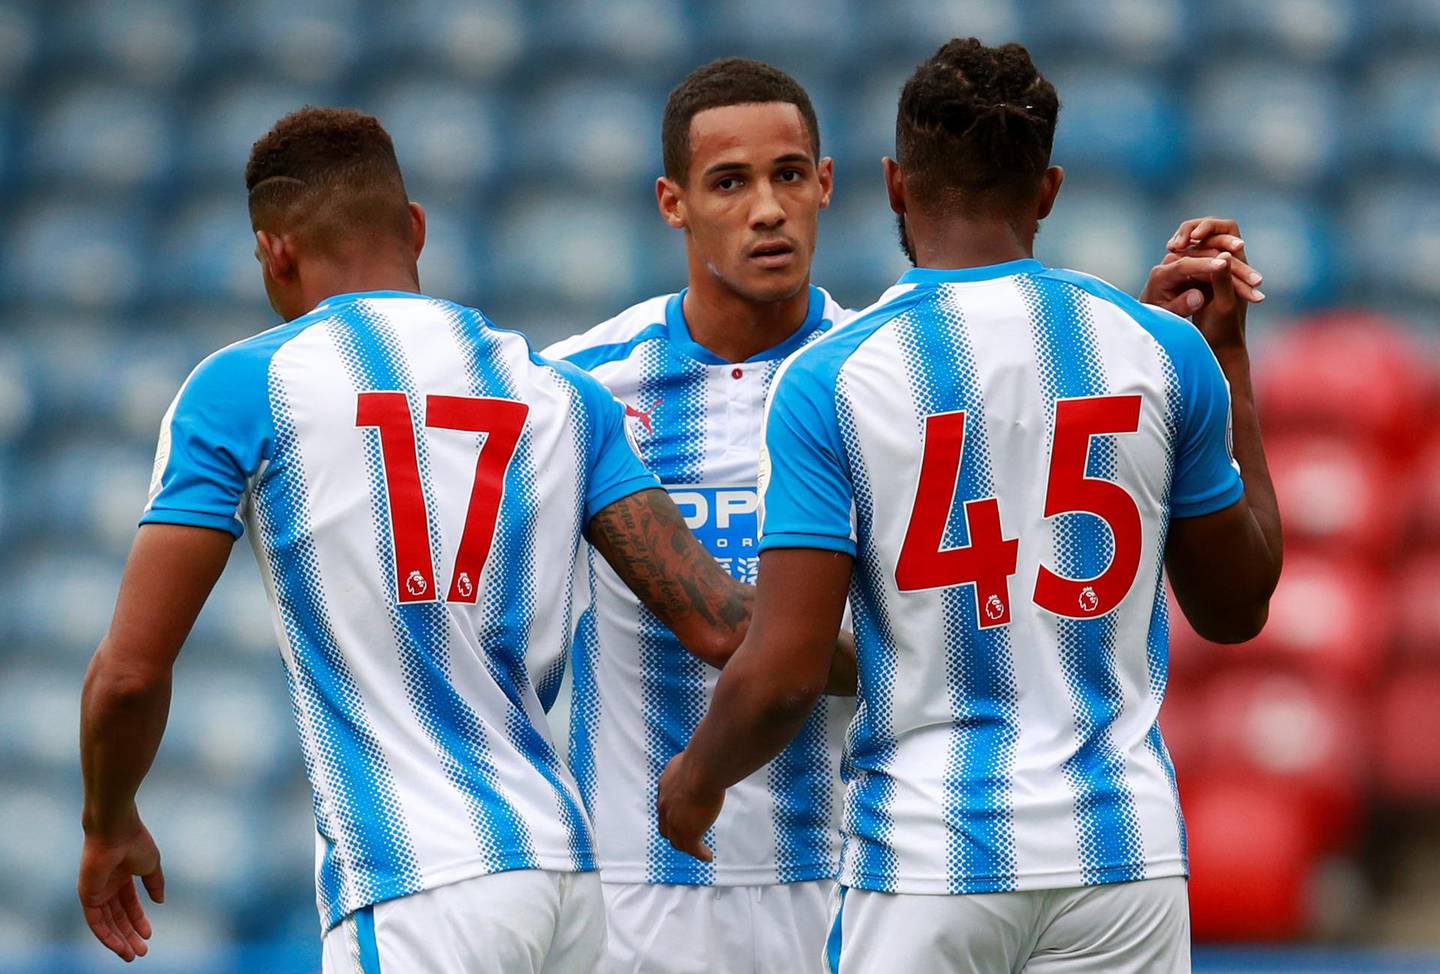 Soccer Football - Huddersfield Town vs Udinese - Pre Season Friendly - Huddersfield, Britain - July 26, 2017   Huddersfield's Tom ince celebrates scoring their first goal with team mates    Action Images via Reuters/Jason Cairnduff